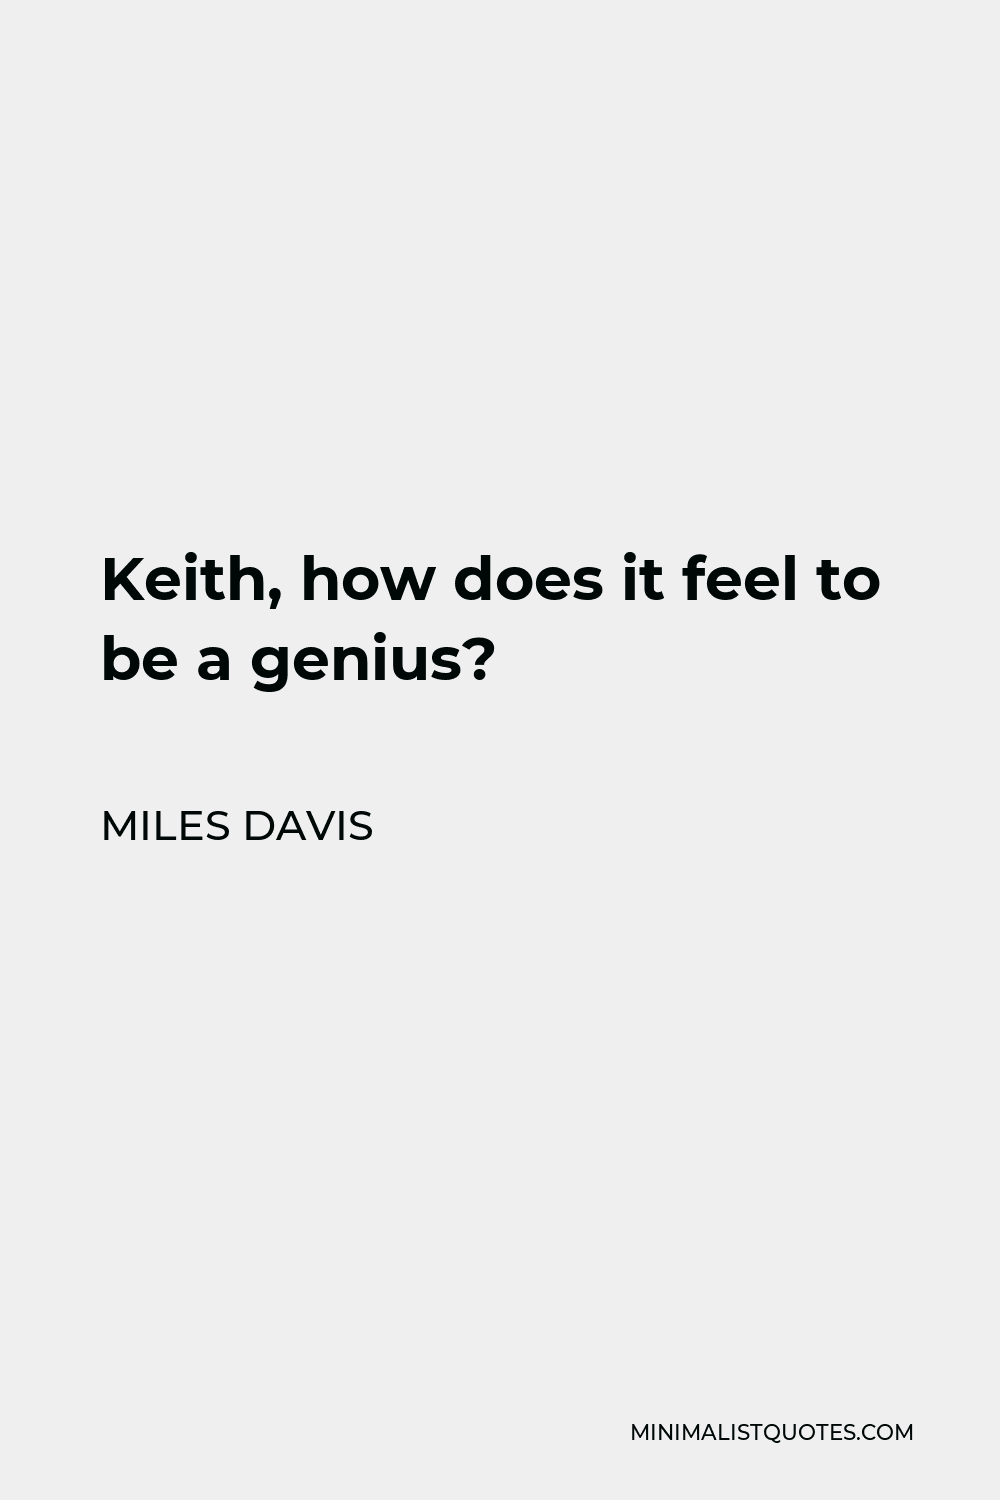 Miles Davis Quote - Keith, how does it feel to be a genius?